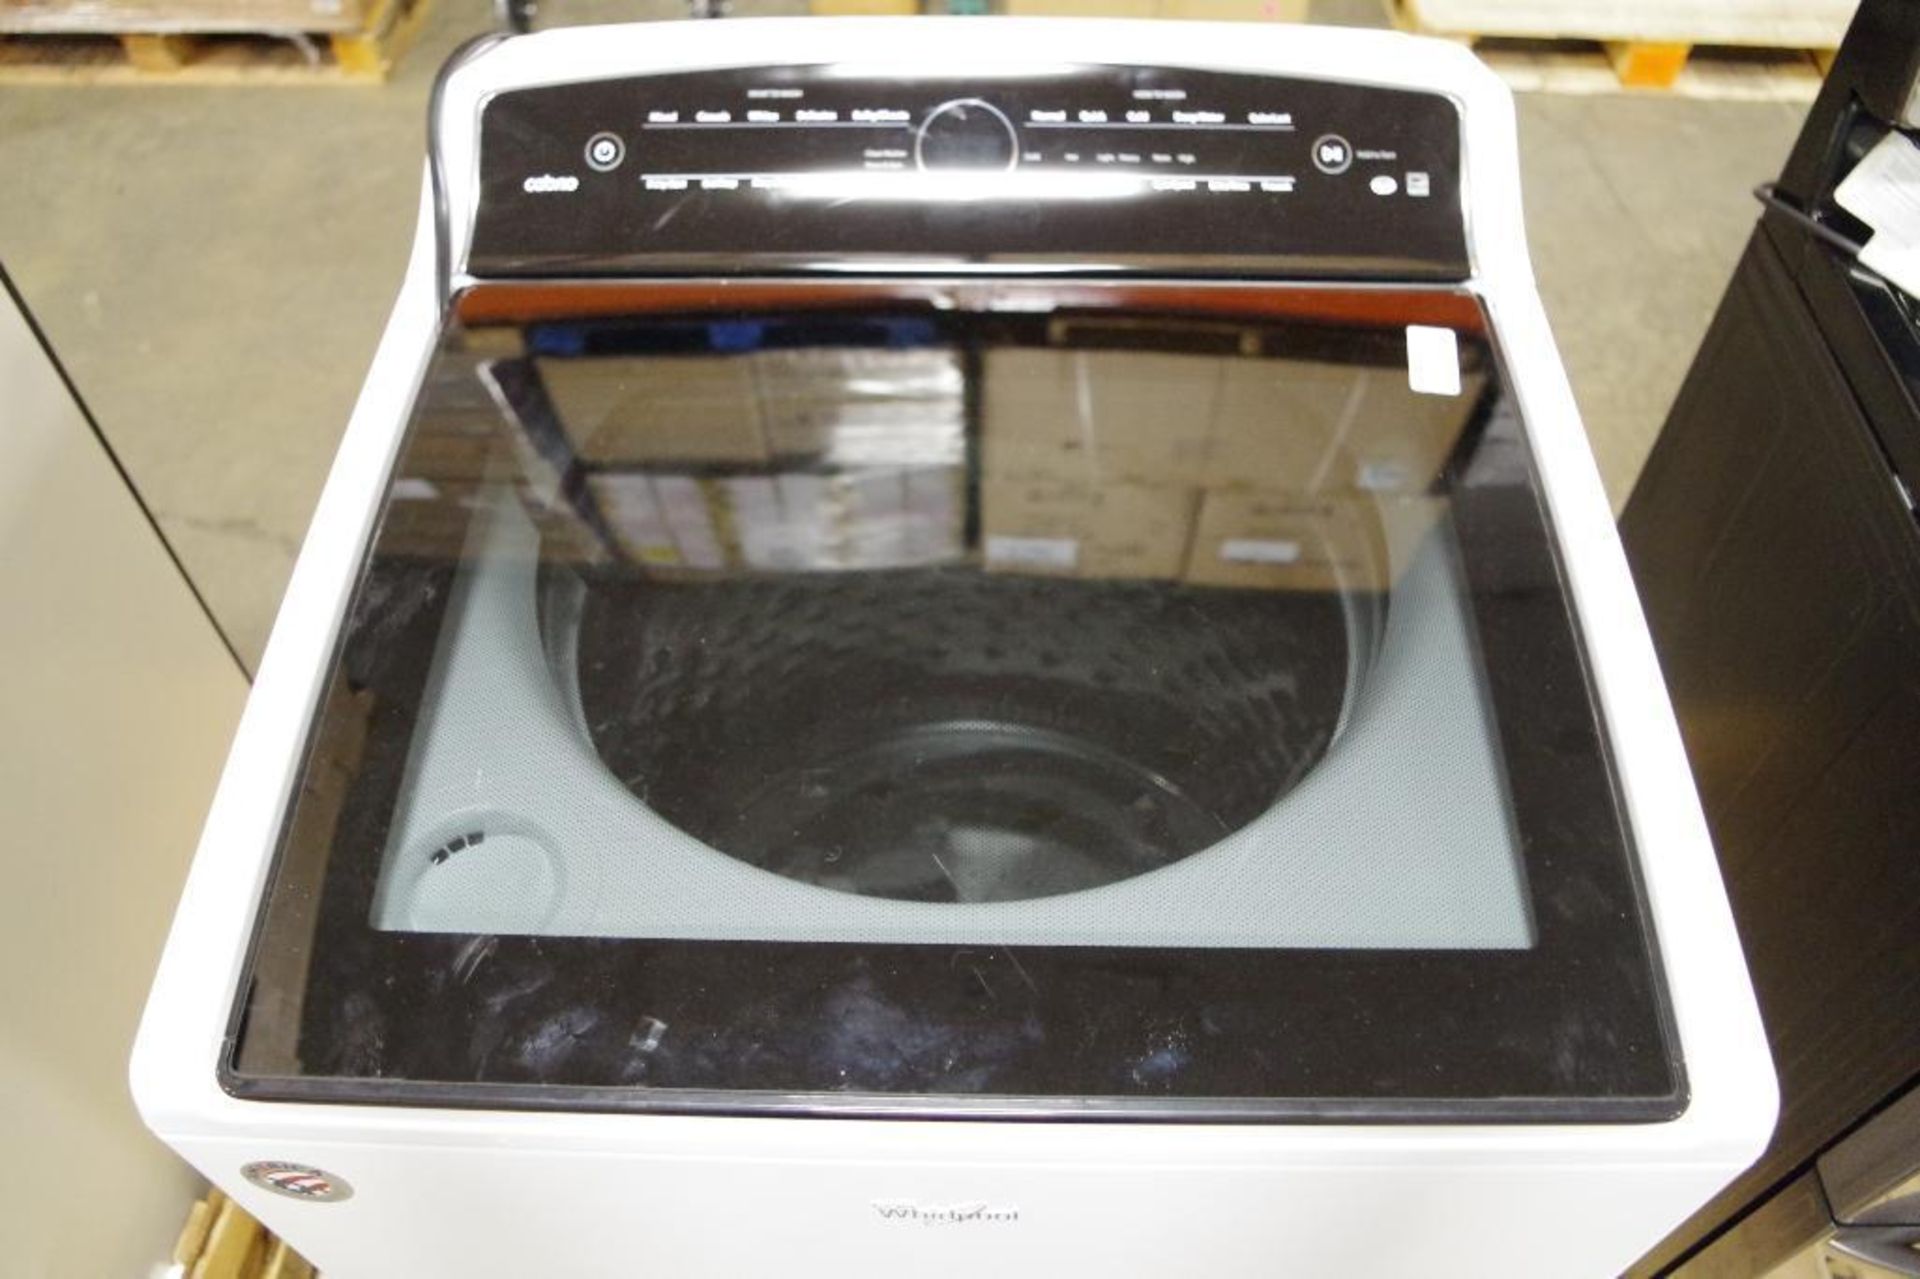 WHIRLPOOL Top Load Washer M/N WTW8000DW3 (Must inspect to assess condition) - Image 4 of 9